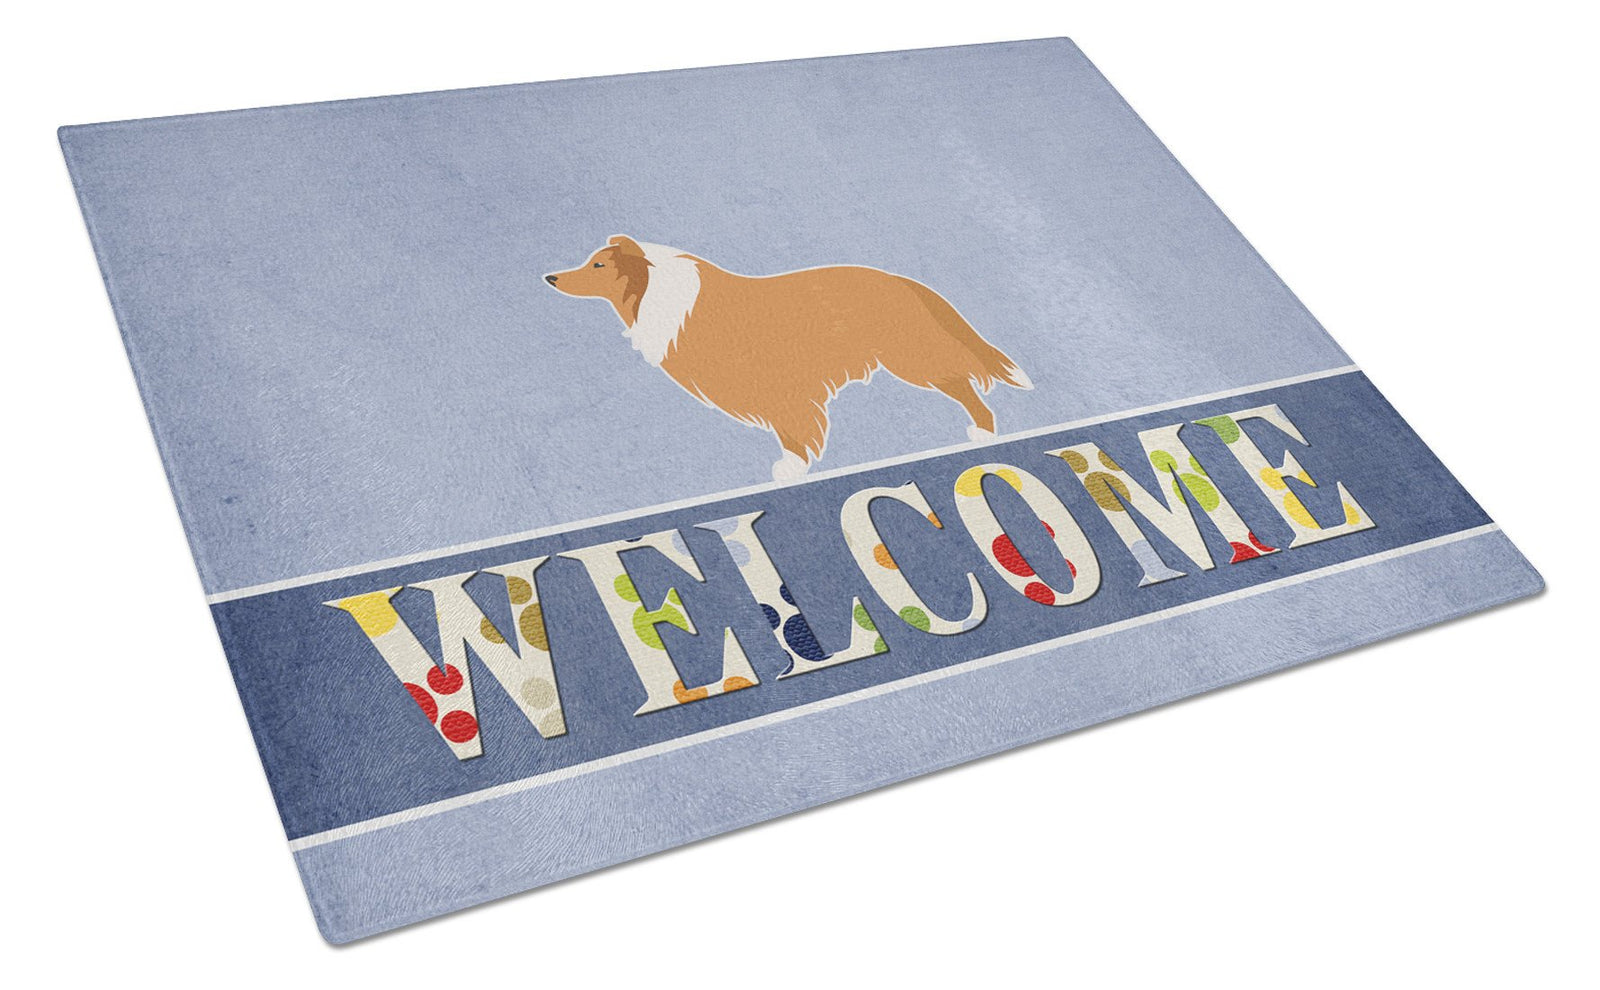 Collie Welcome Glass Cutting Board Large BB5520LCB by Caroline's Treasures